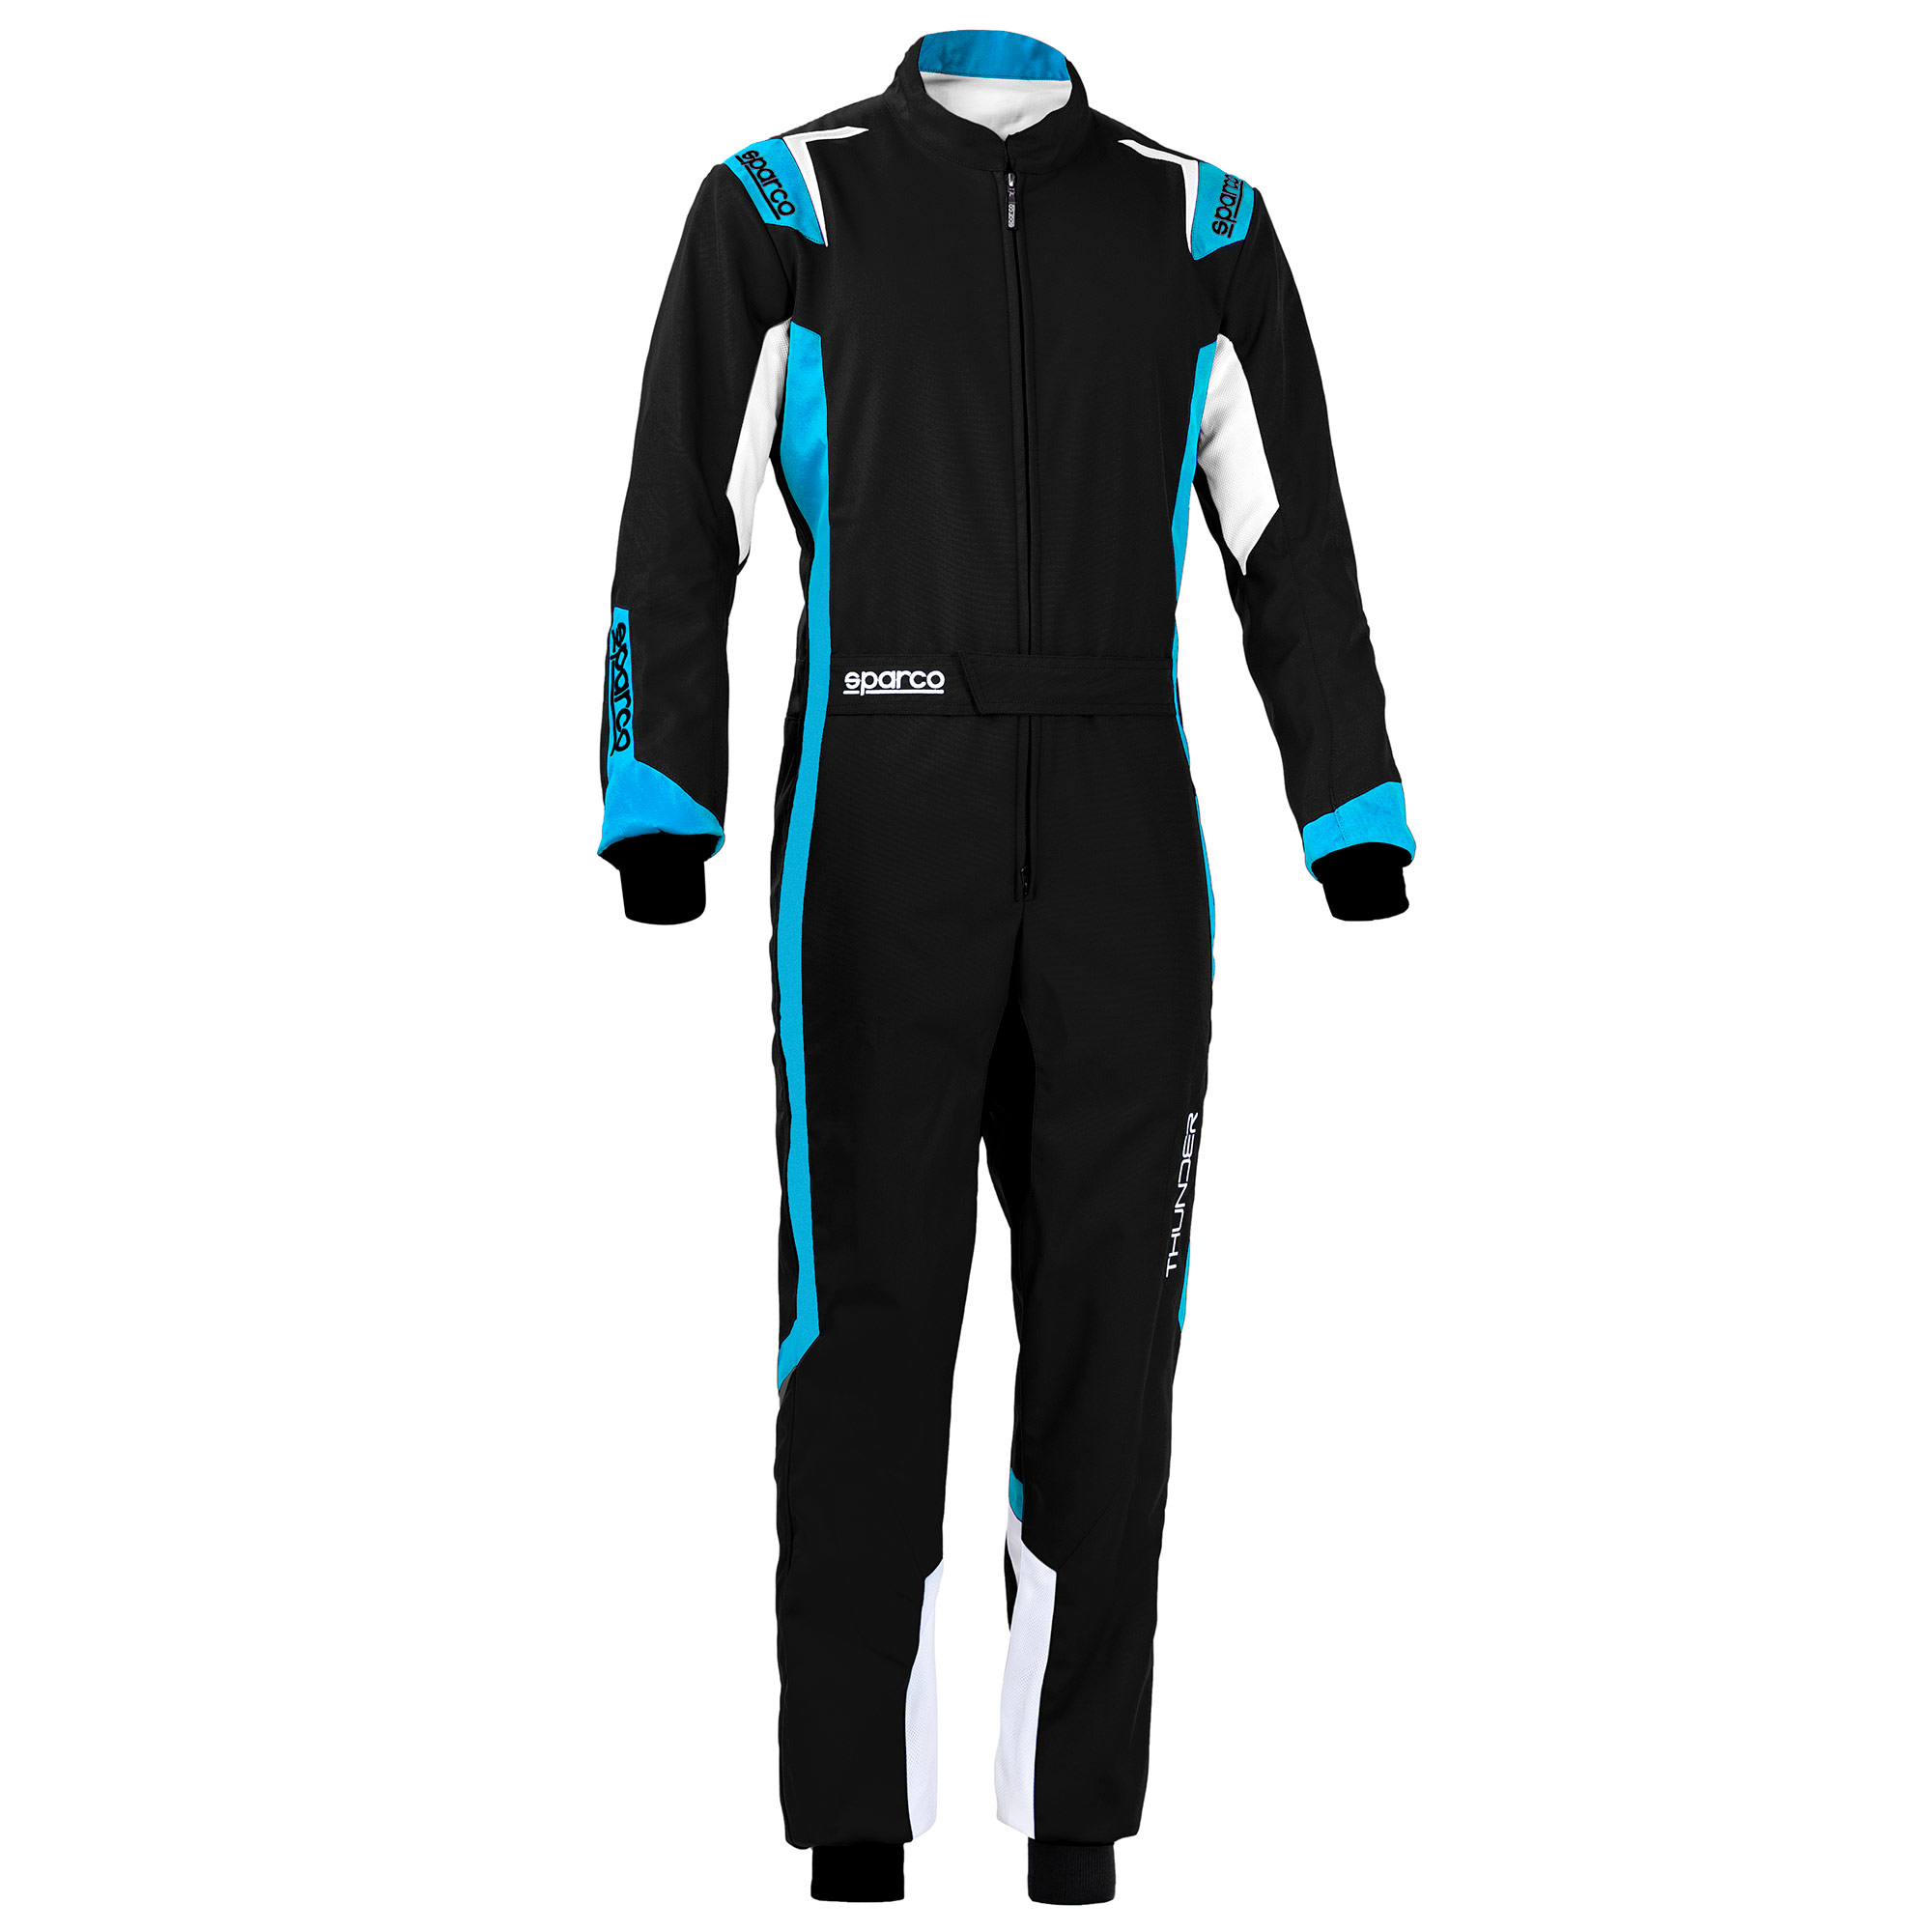 Details about   New Go Kart Racing Suit/Karting Suit CIK/FIA Approved 